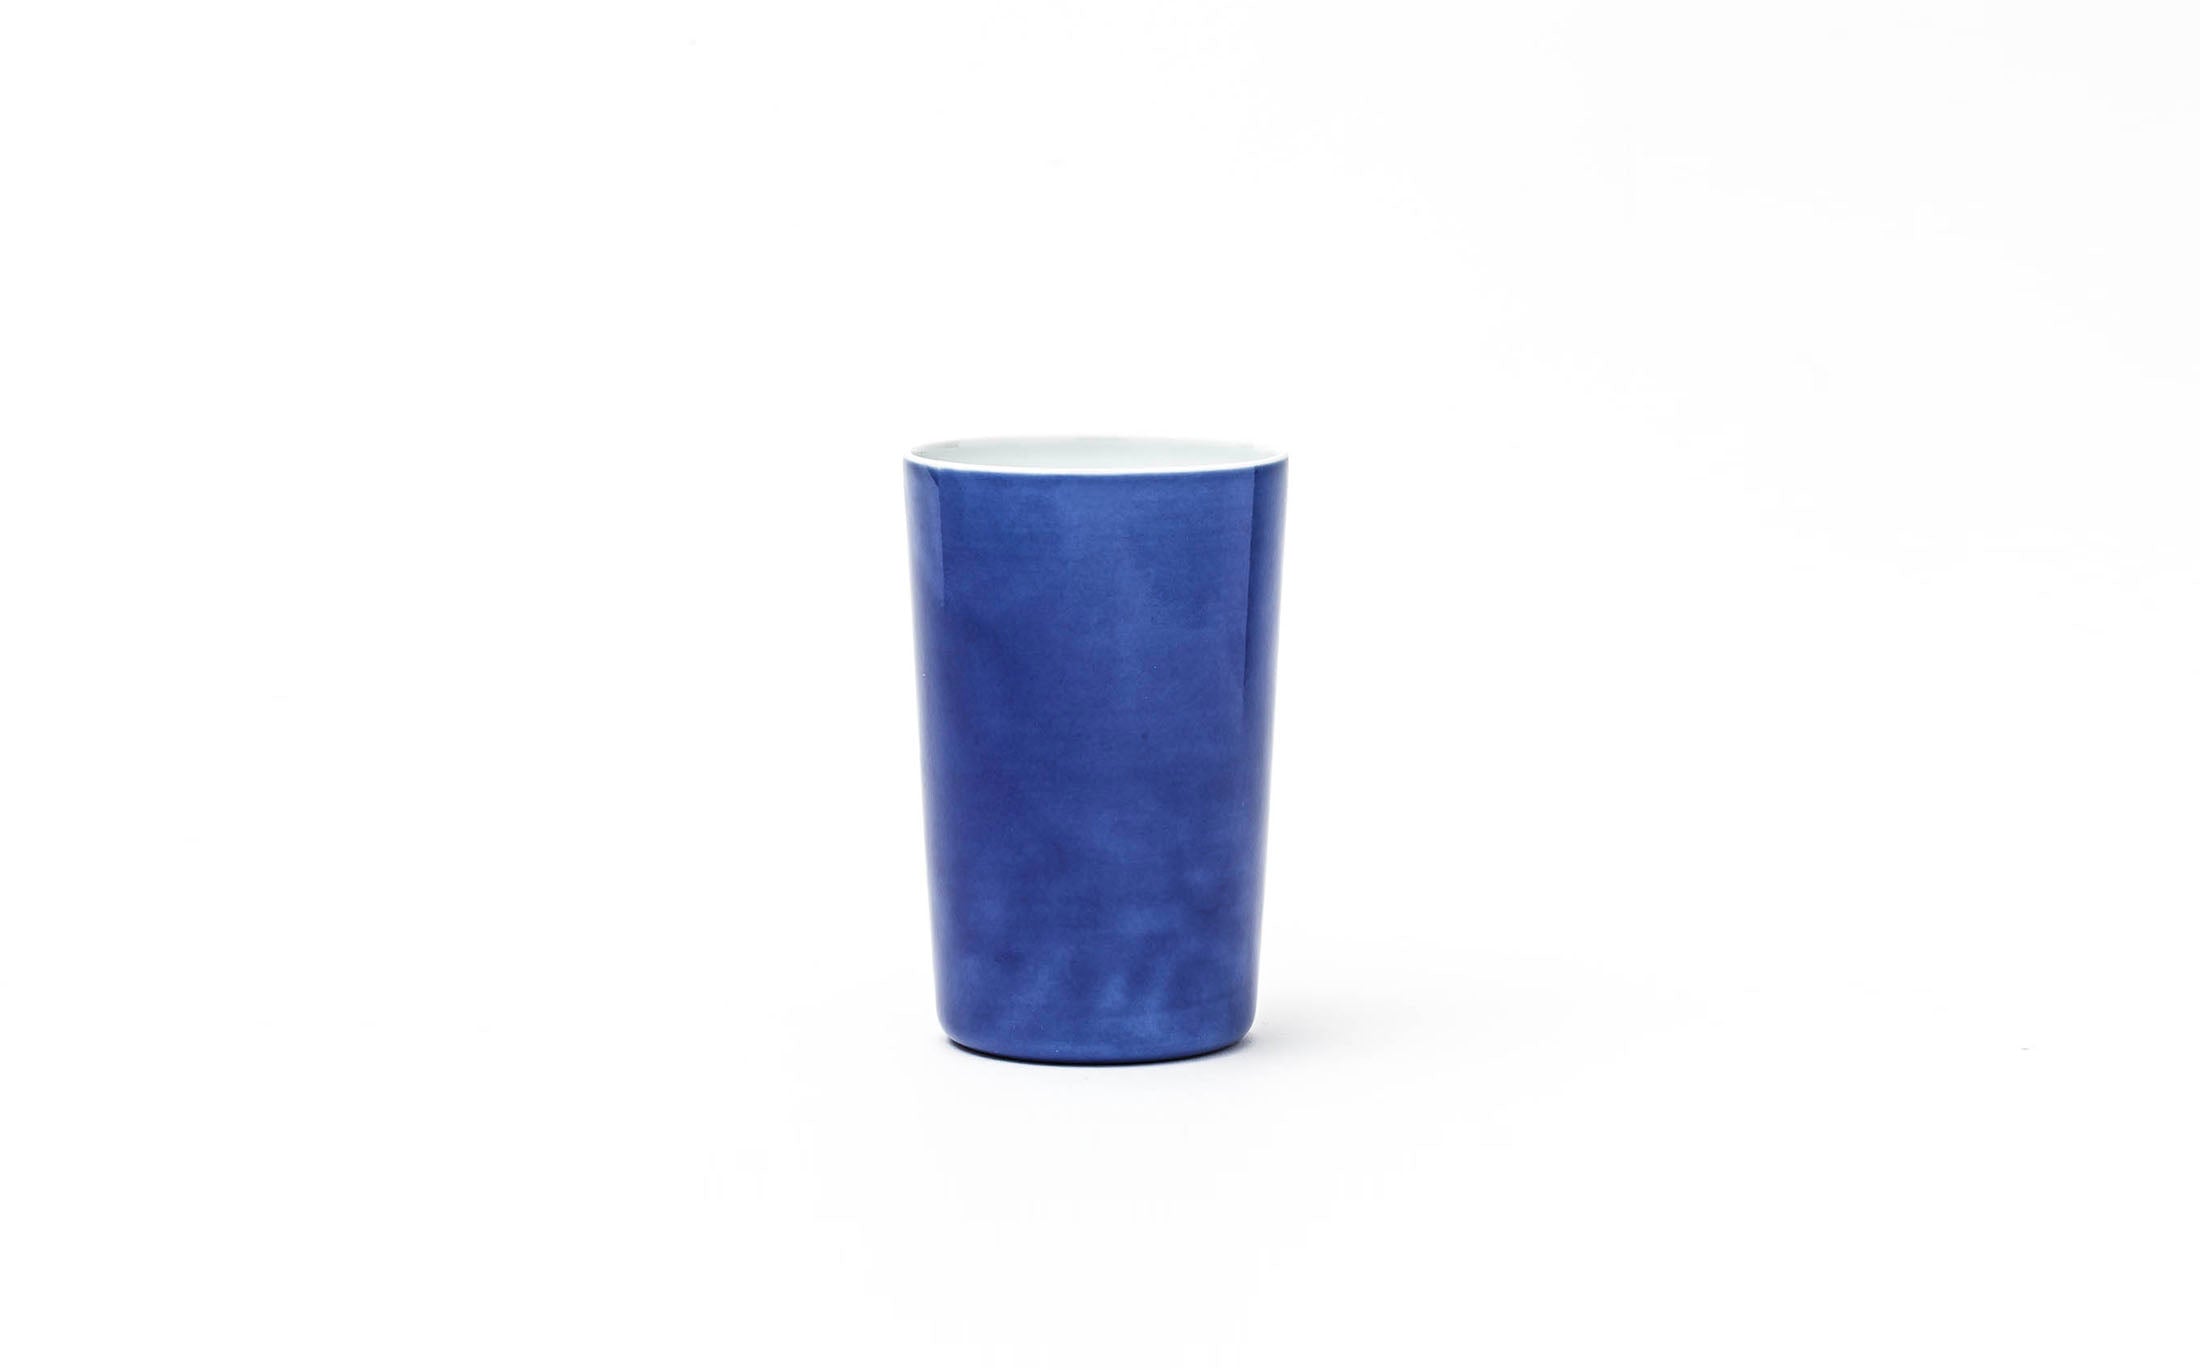 Hiya - Porcelain Overall Blue - Cup "Beer"